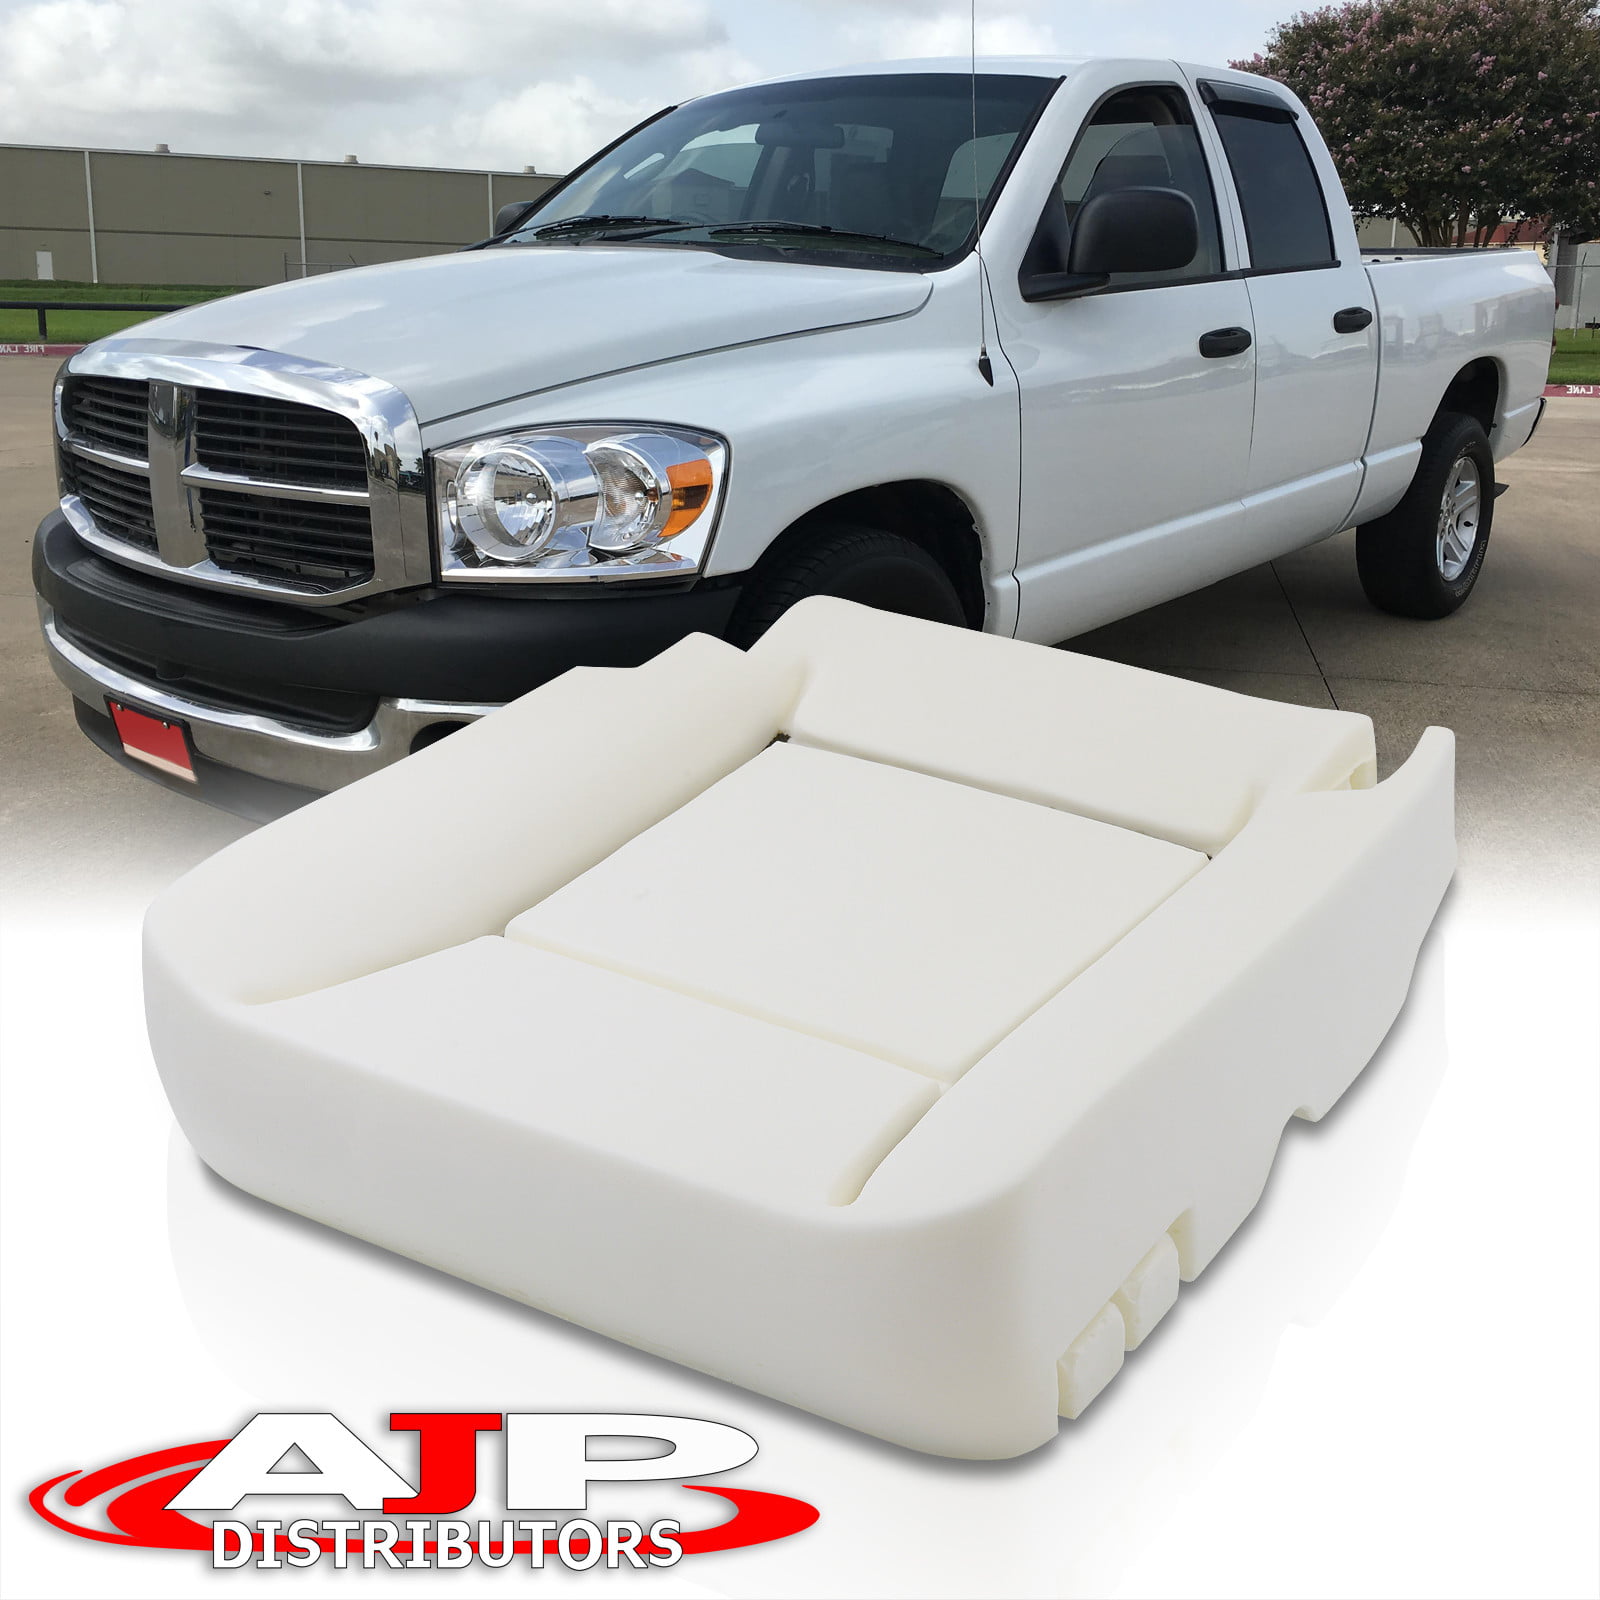 Front Bucket Seat Bottom Lower Cushion Pad Upgrade for Dodge Ram Pickup Truck 